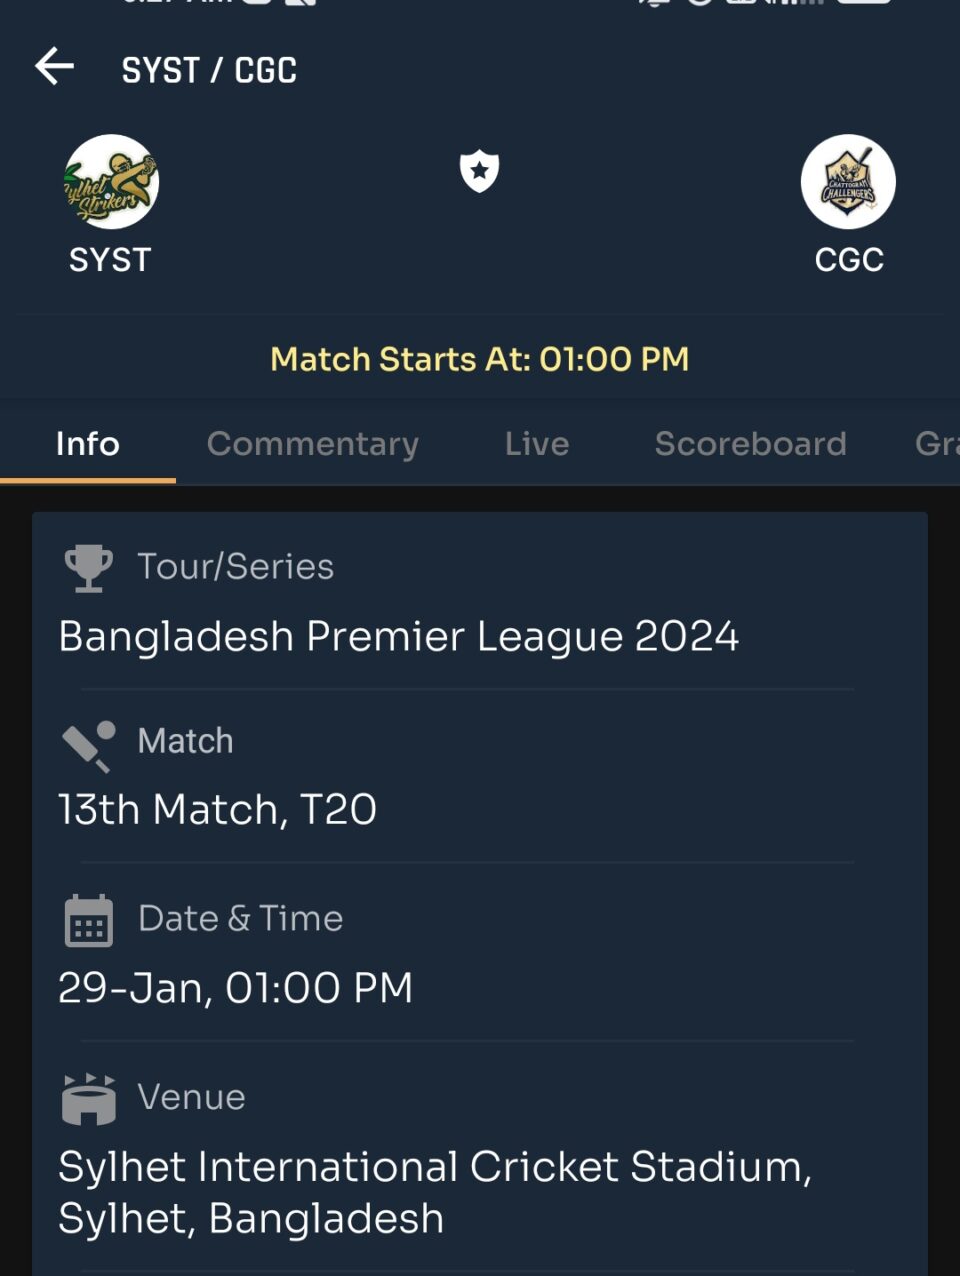 Today BPL Prediction |Match Number 13| CGC vs SYST | Toss and Match Analysis | Pitch & Weather Report